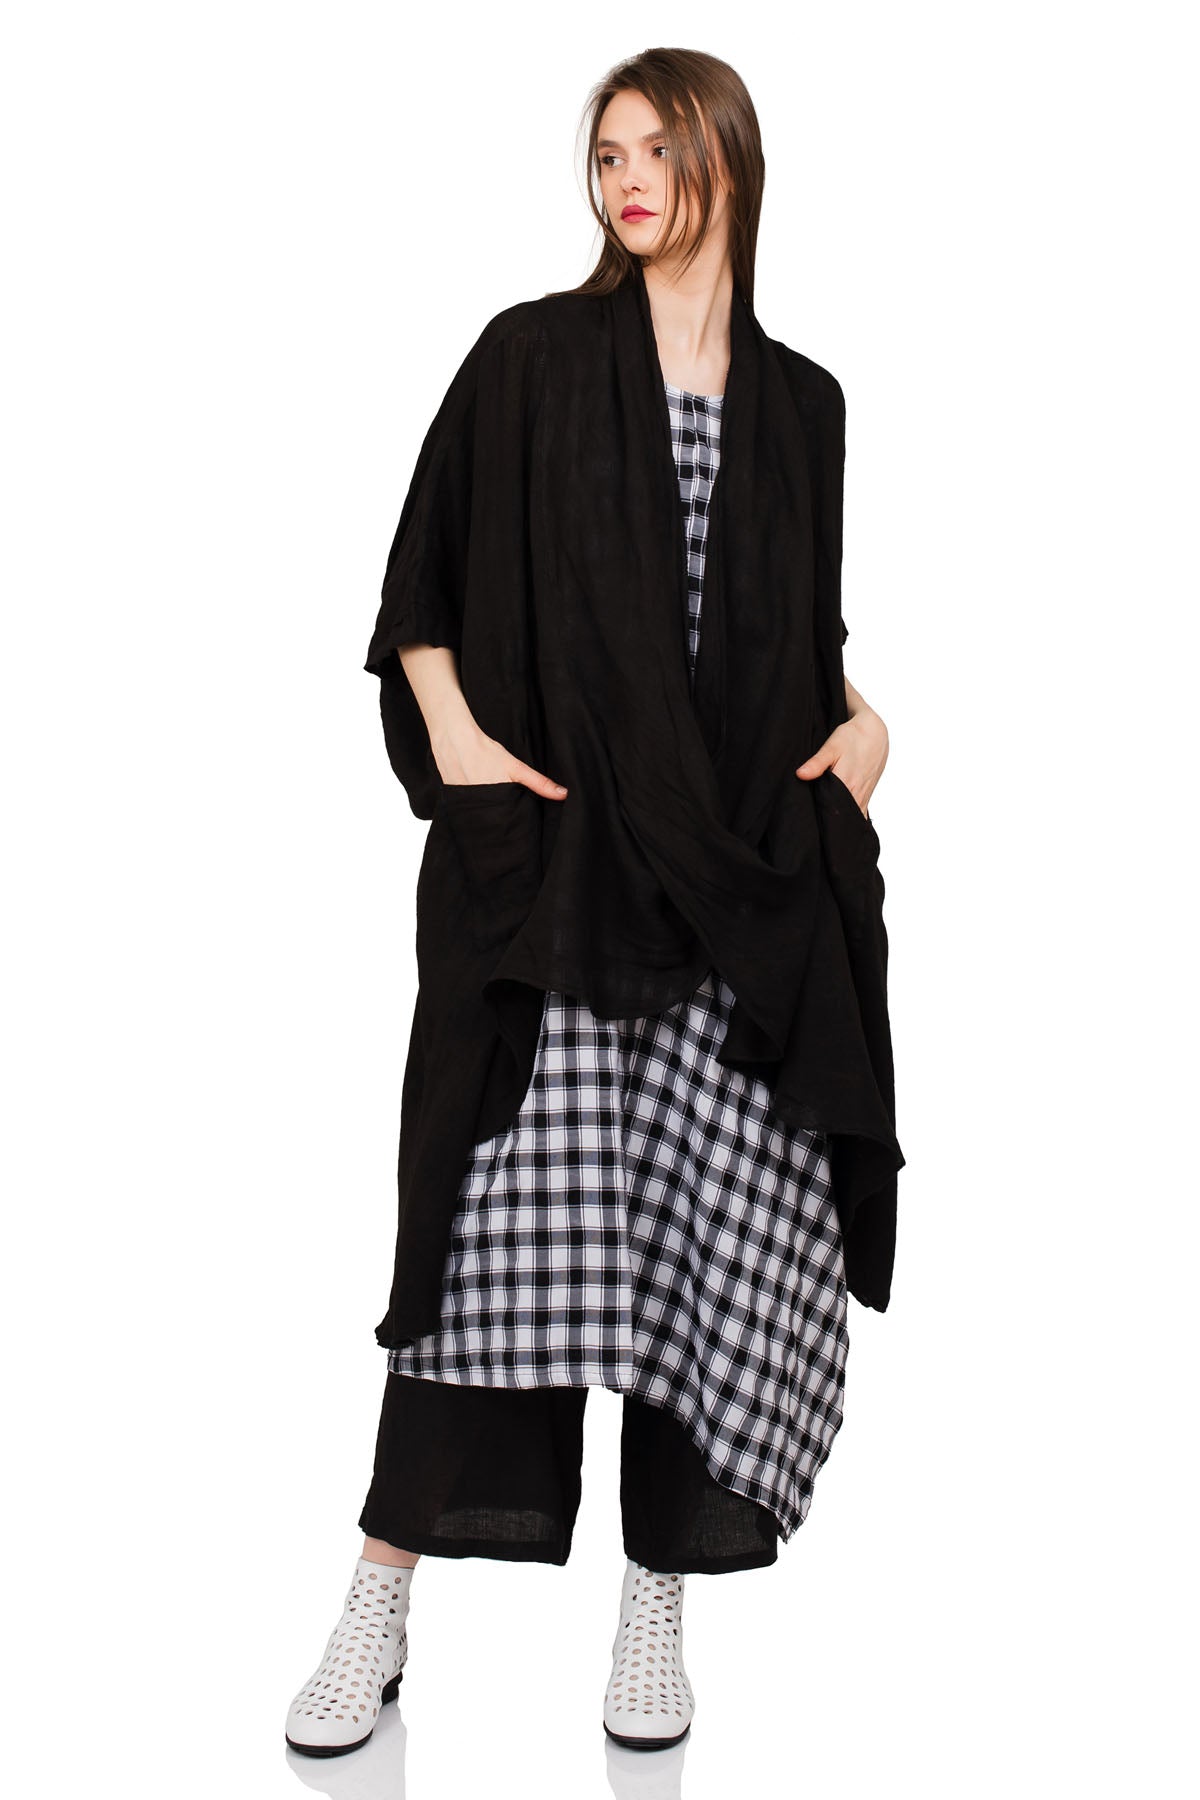 Chic & Simple Combination Combination Megan Blouse, Kali Dress & Nora Pants - Black and Black and White Check